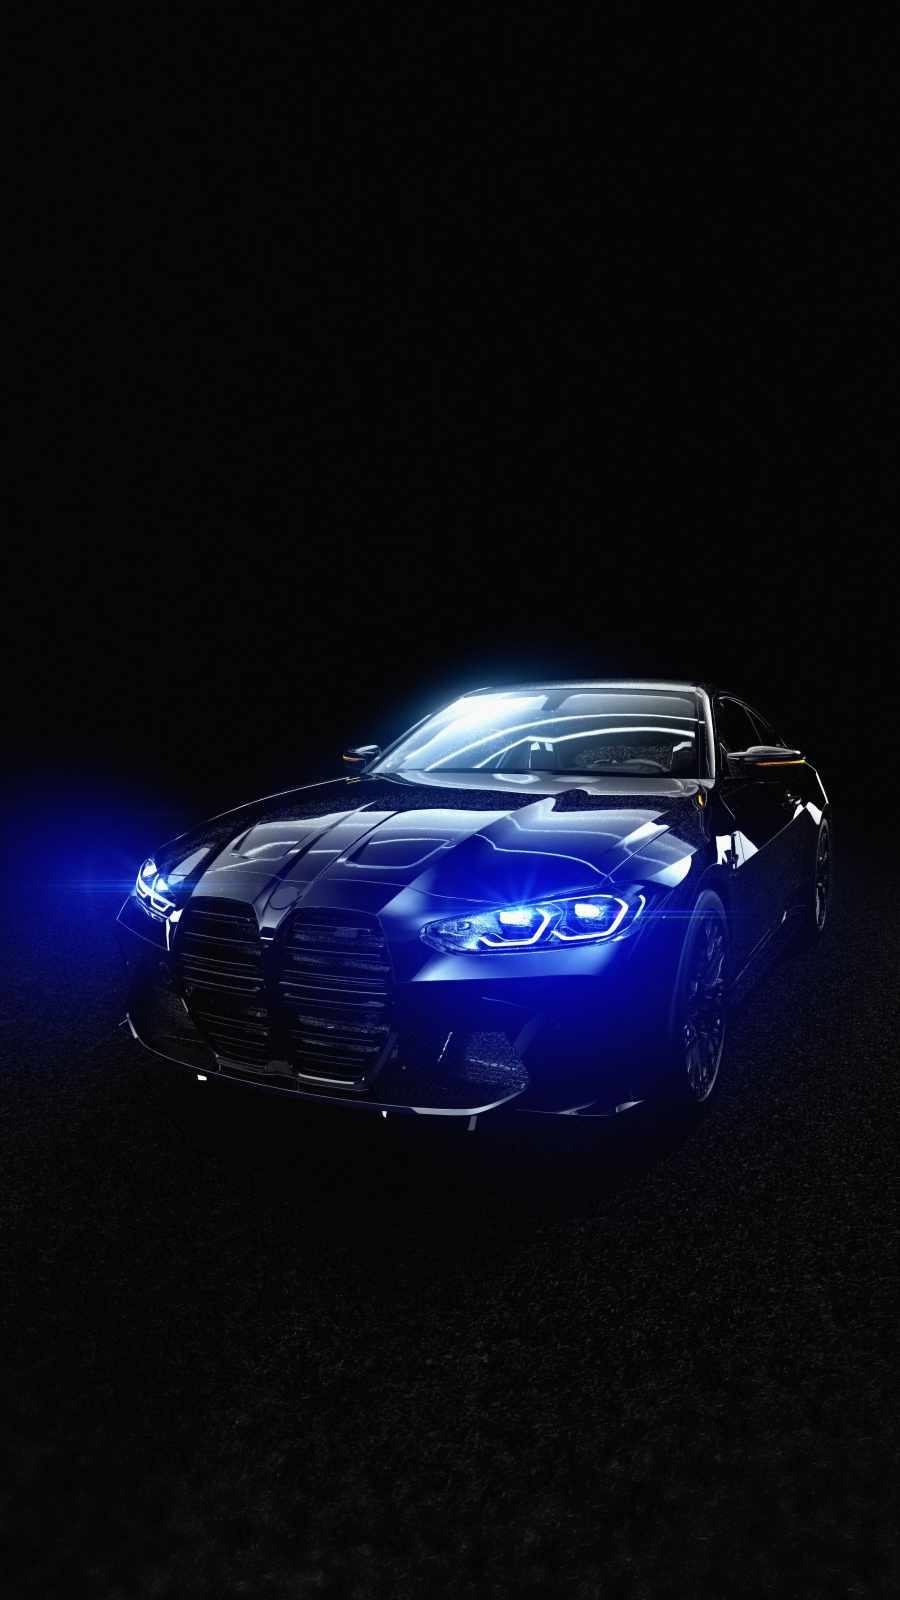 BMW Lights IPhone Wallpaper HD  IPhone Wallpapers